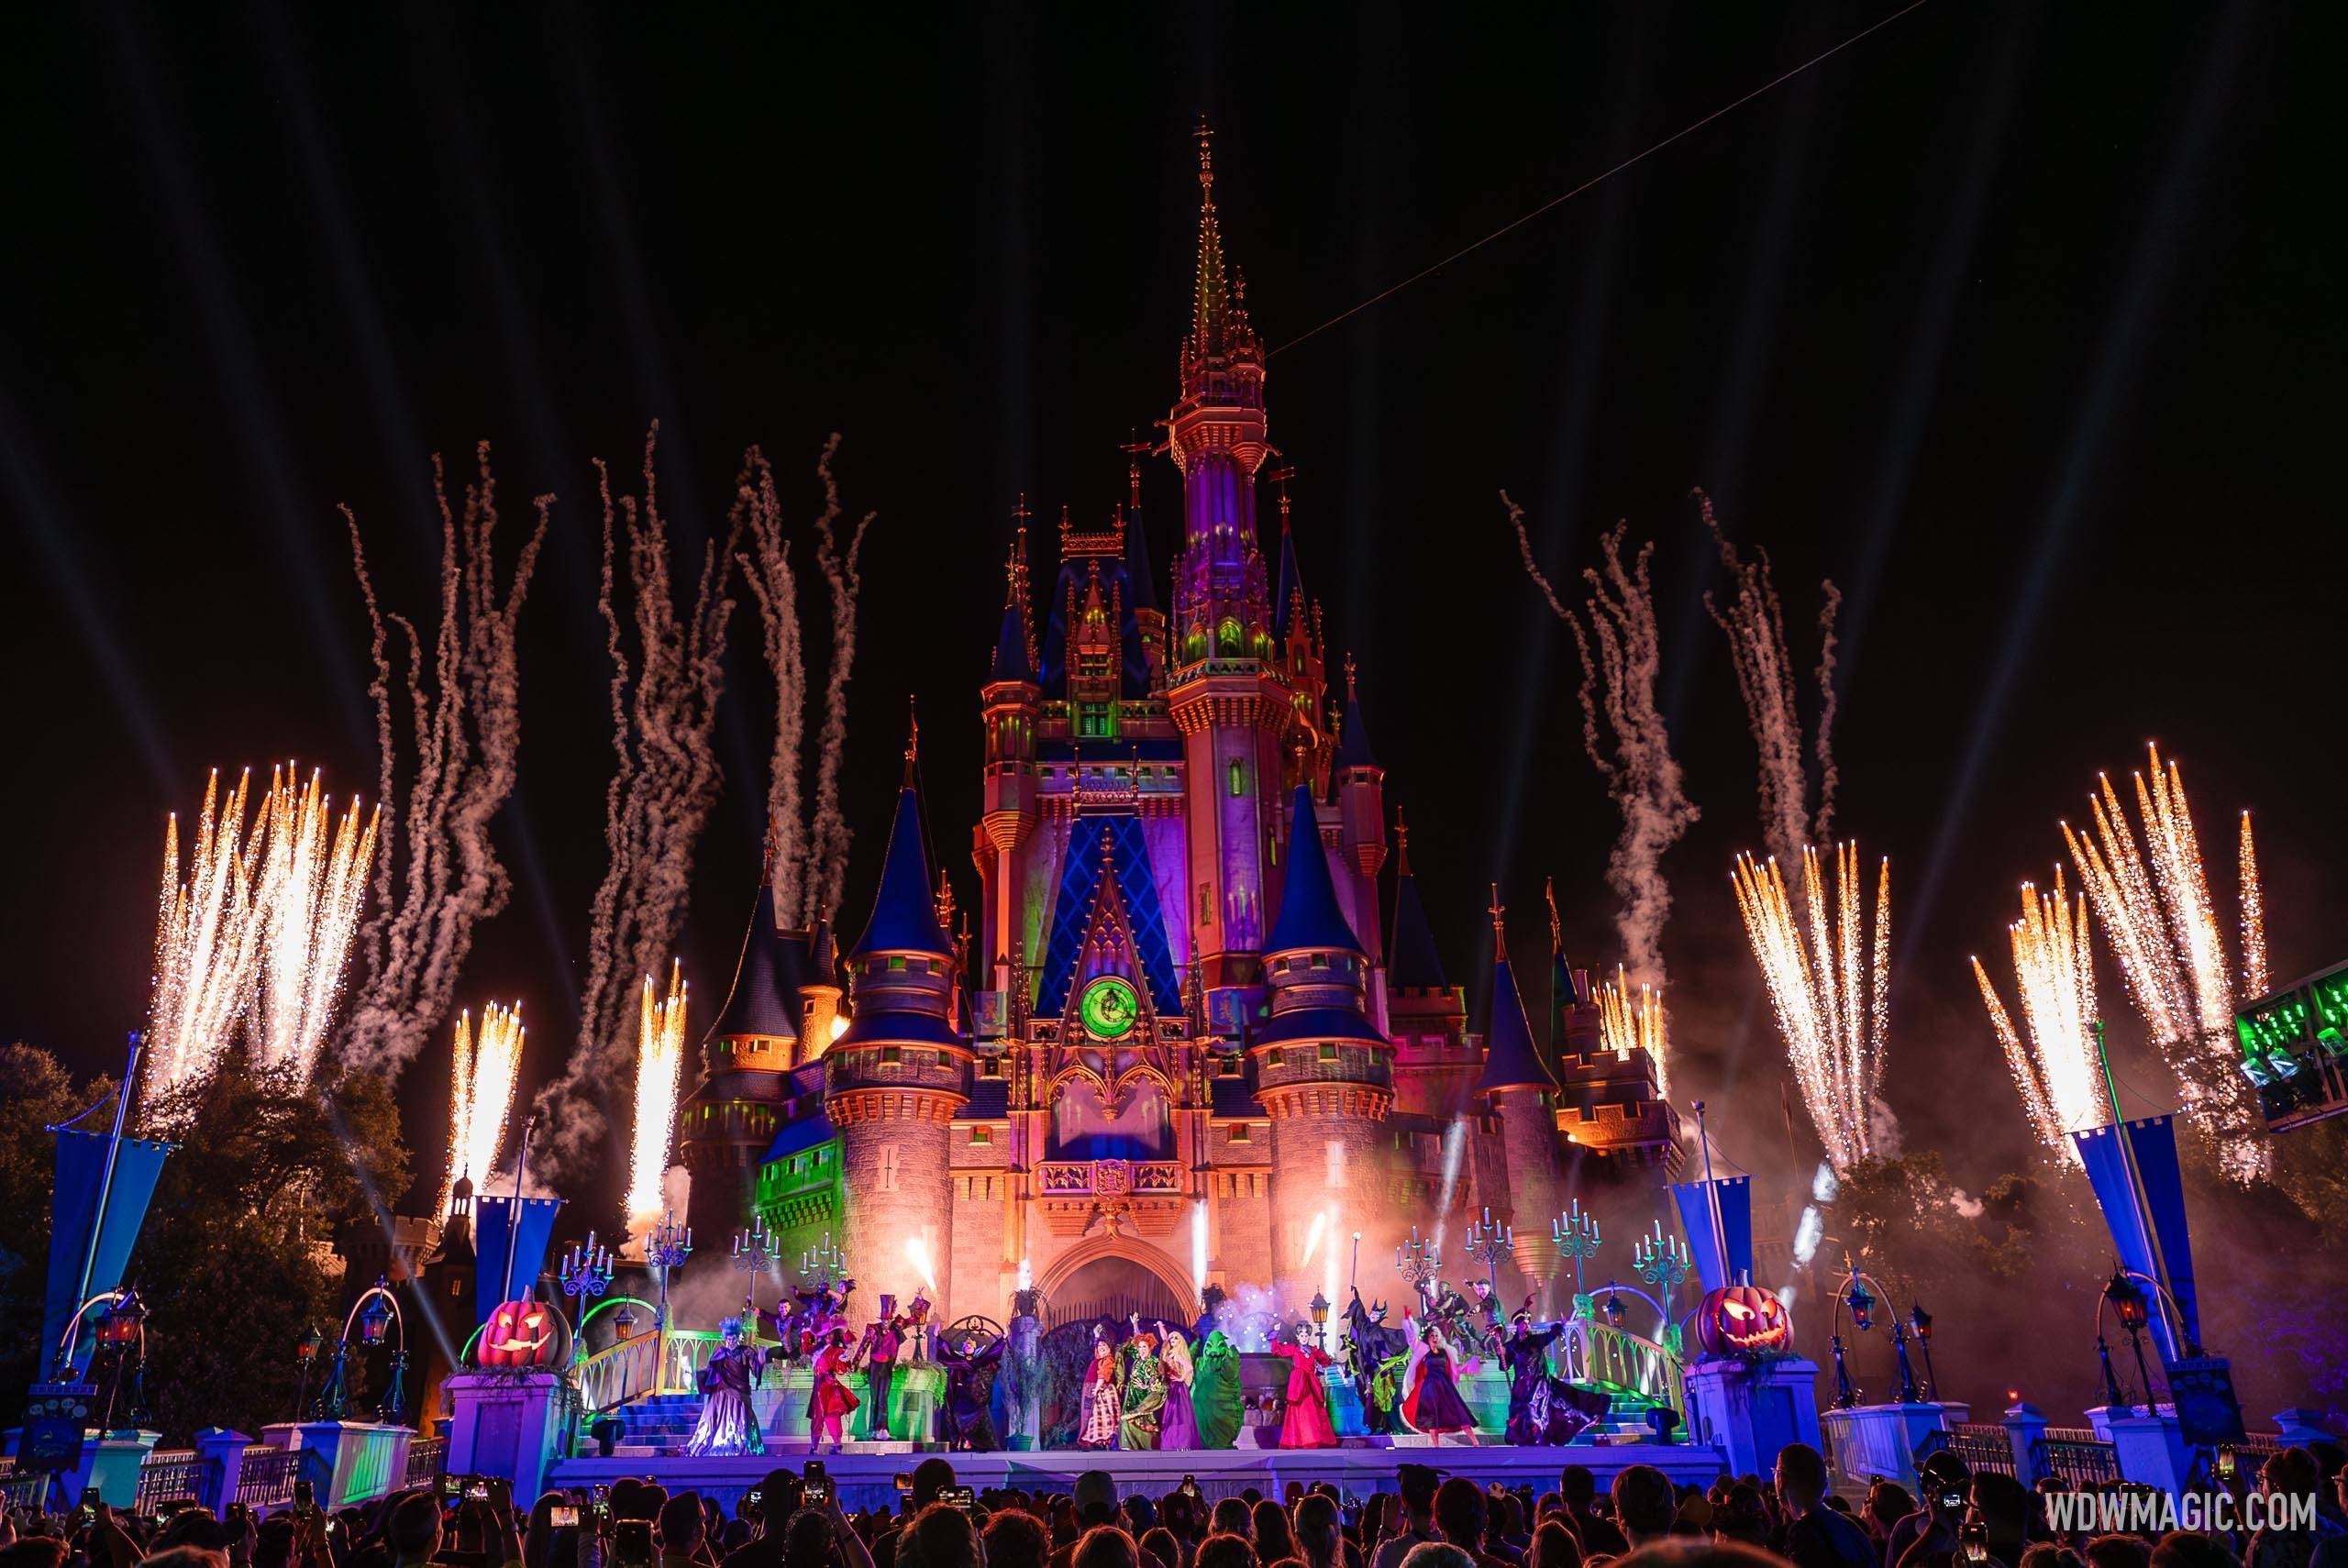 Another date sold out for Mickey's Not-So-Scary Halloween Party